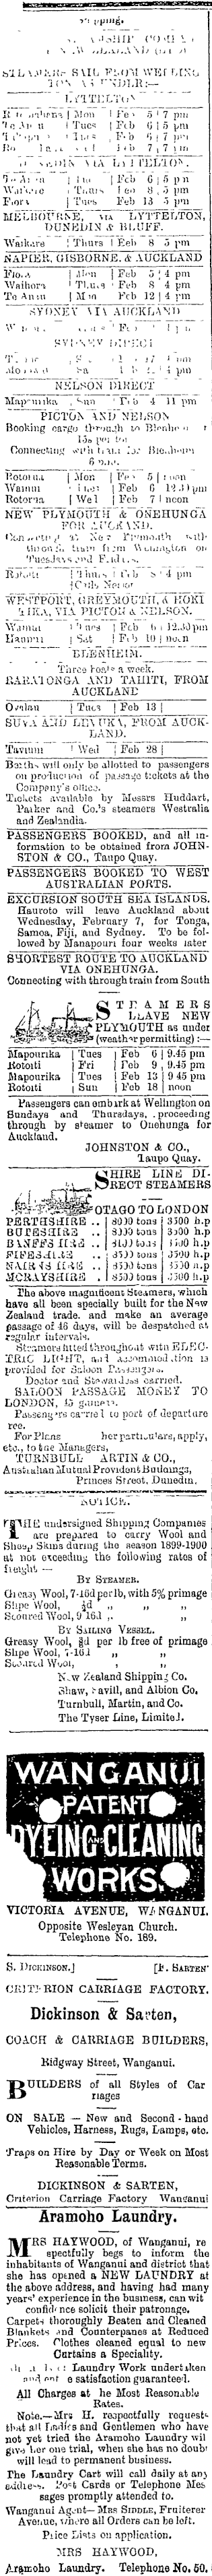 Papers Past Newspapers Wanganui Herald 5 February 1900 Page 4 Advertisements Column 1